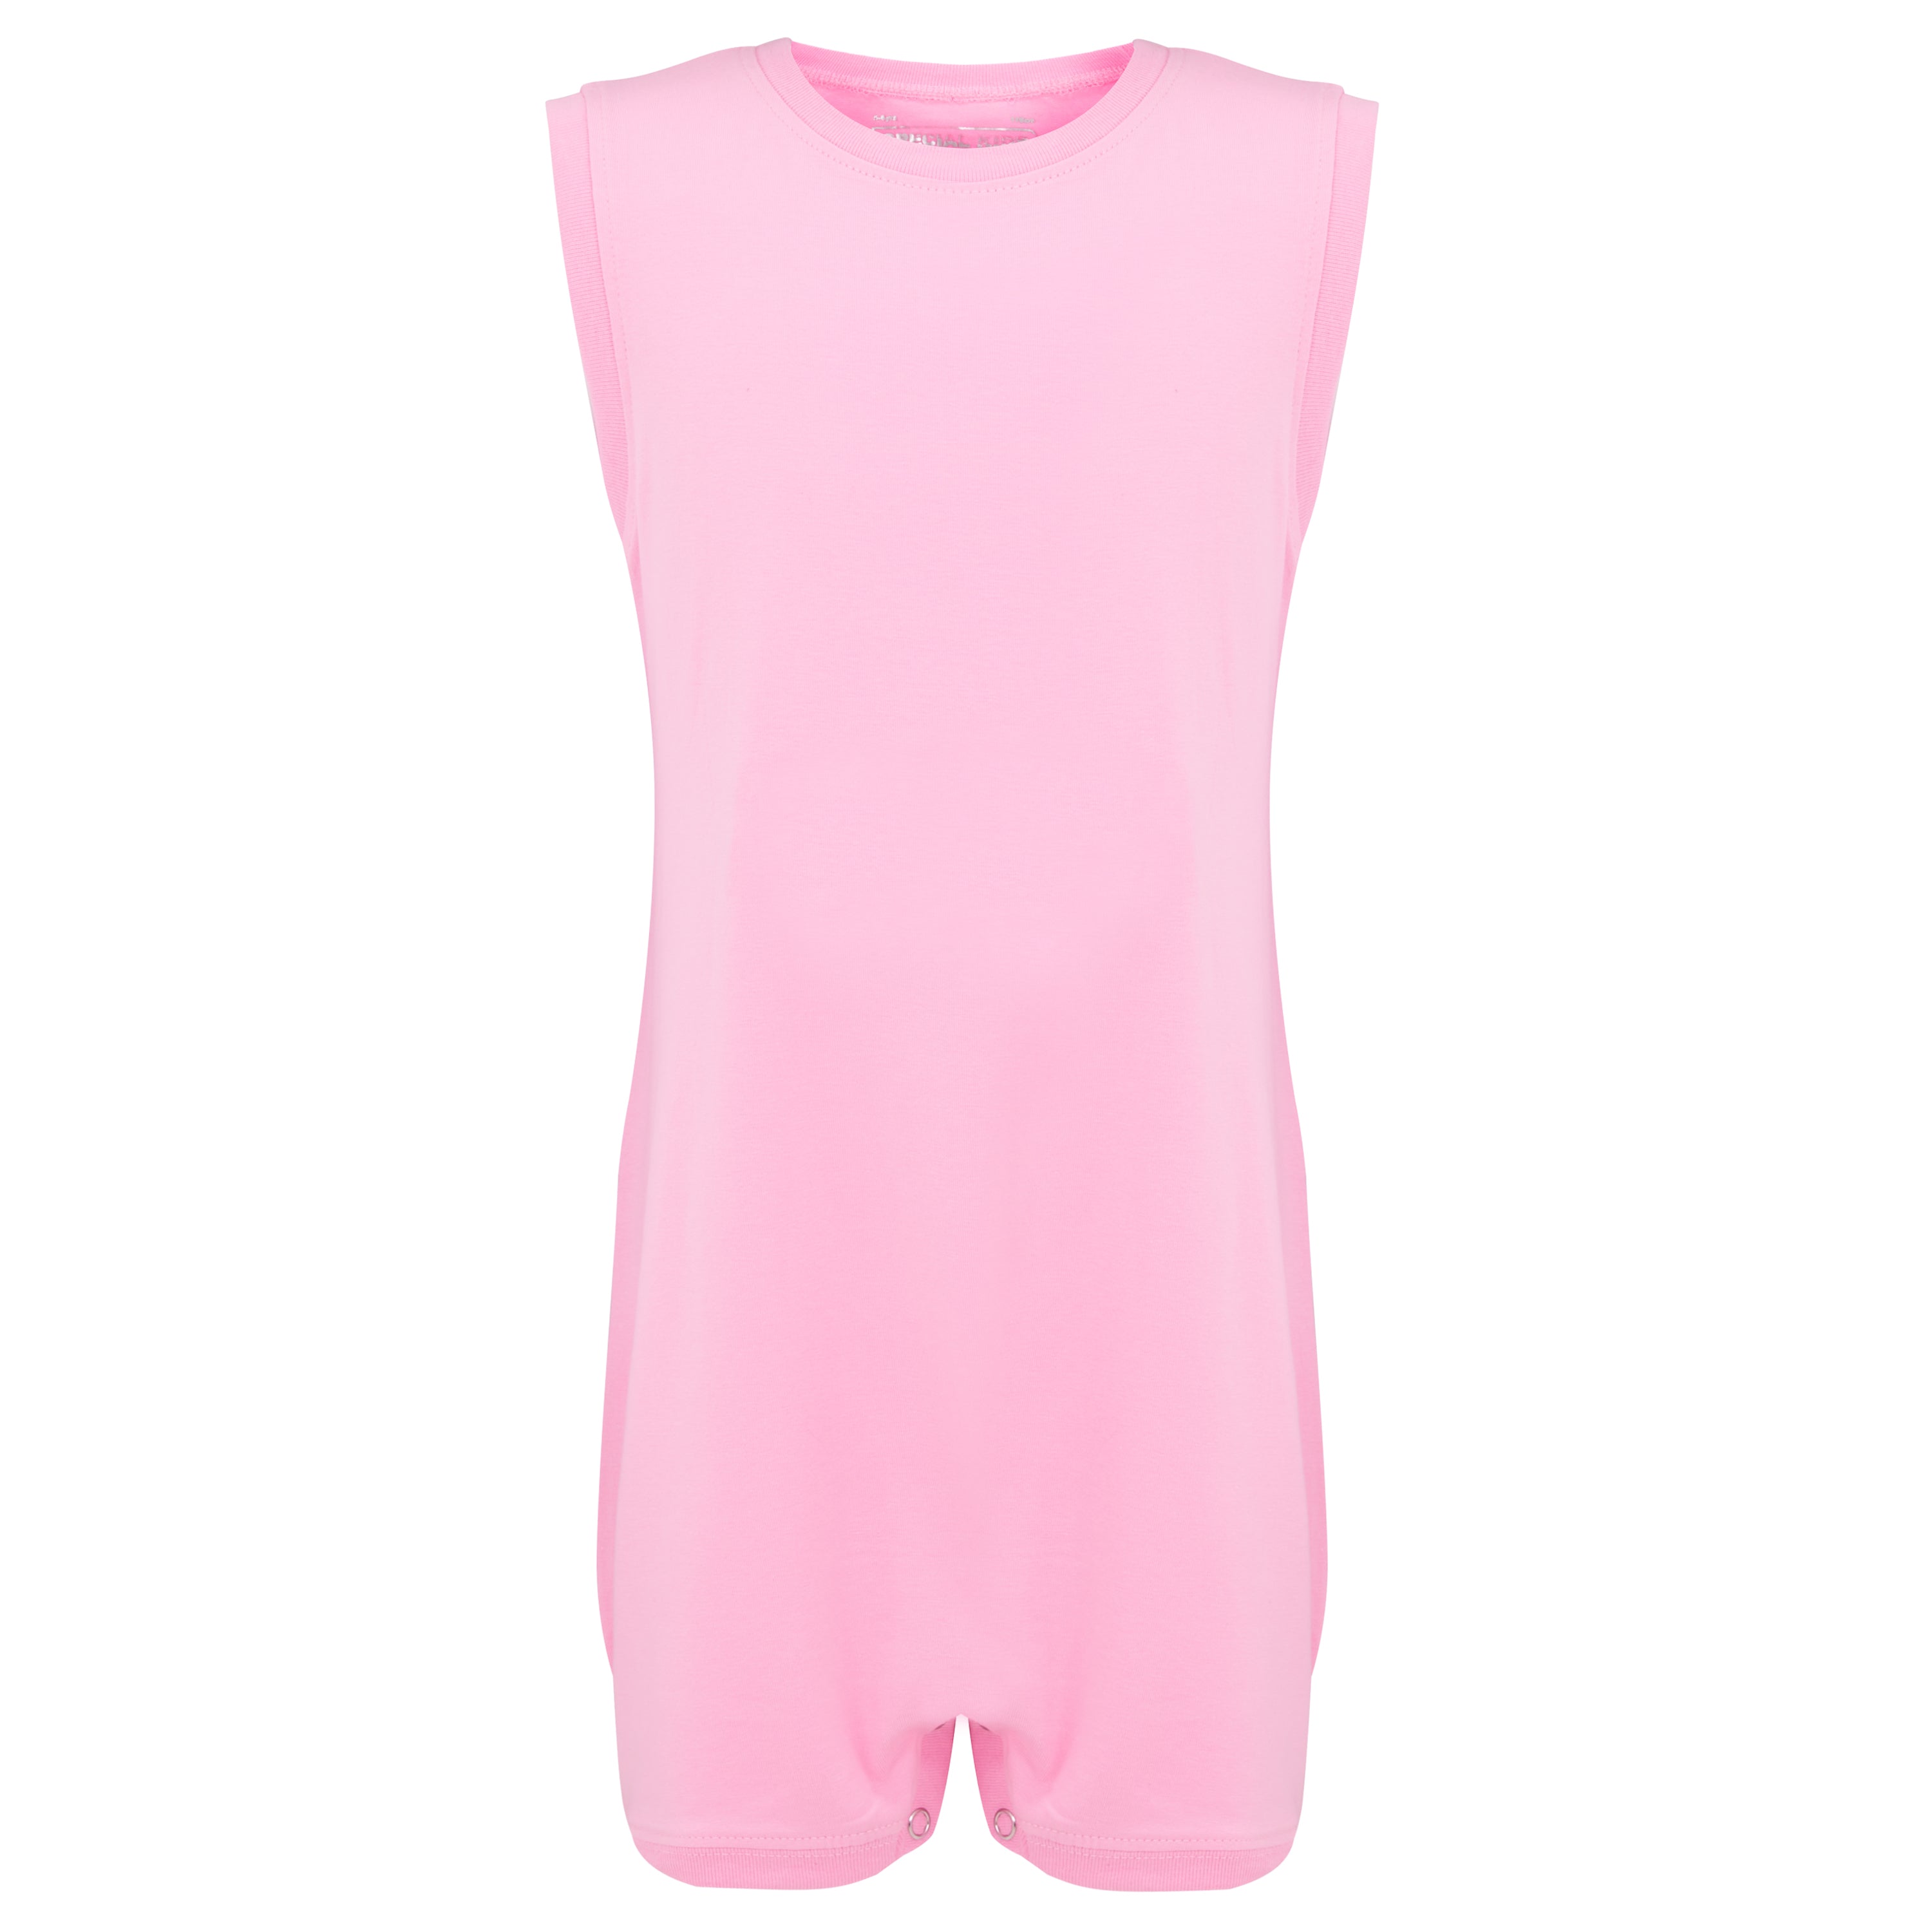 KayCey®P Super Soft Bodysuits - Sleeveless with Tube Access - Kids